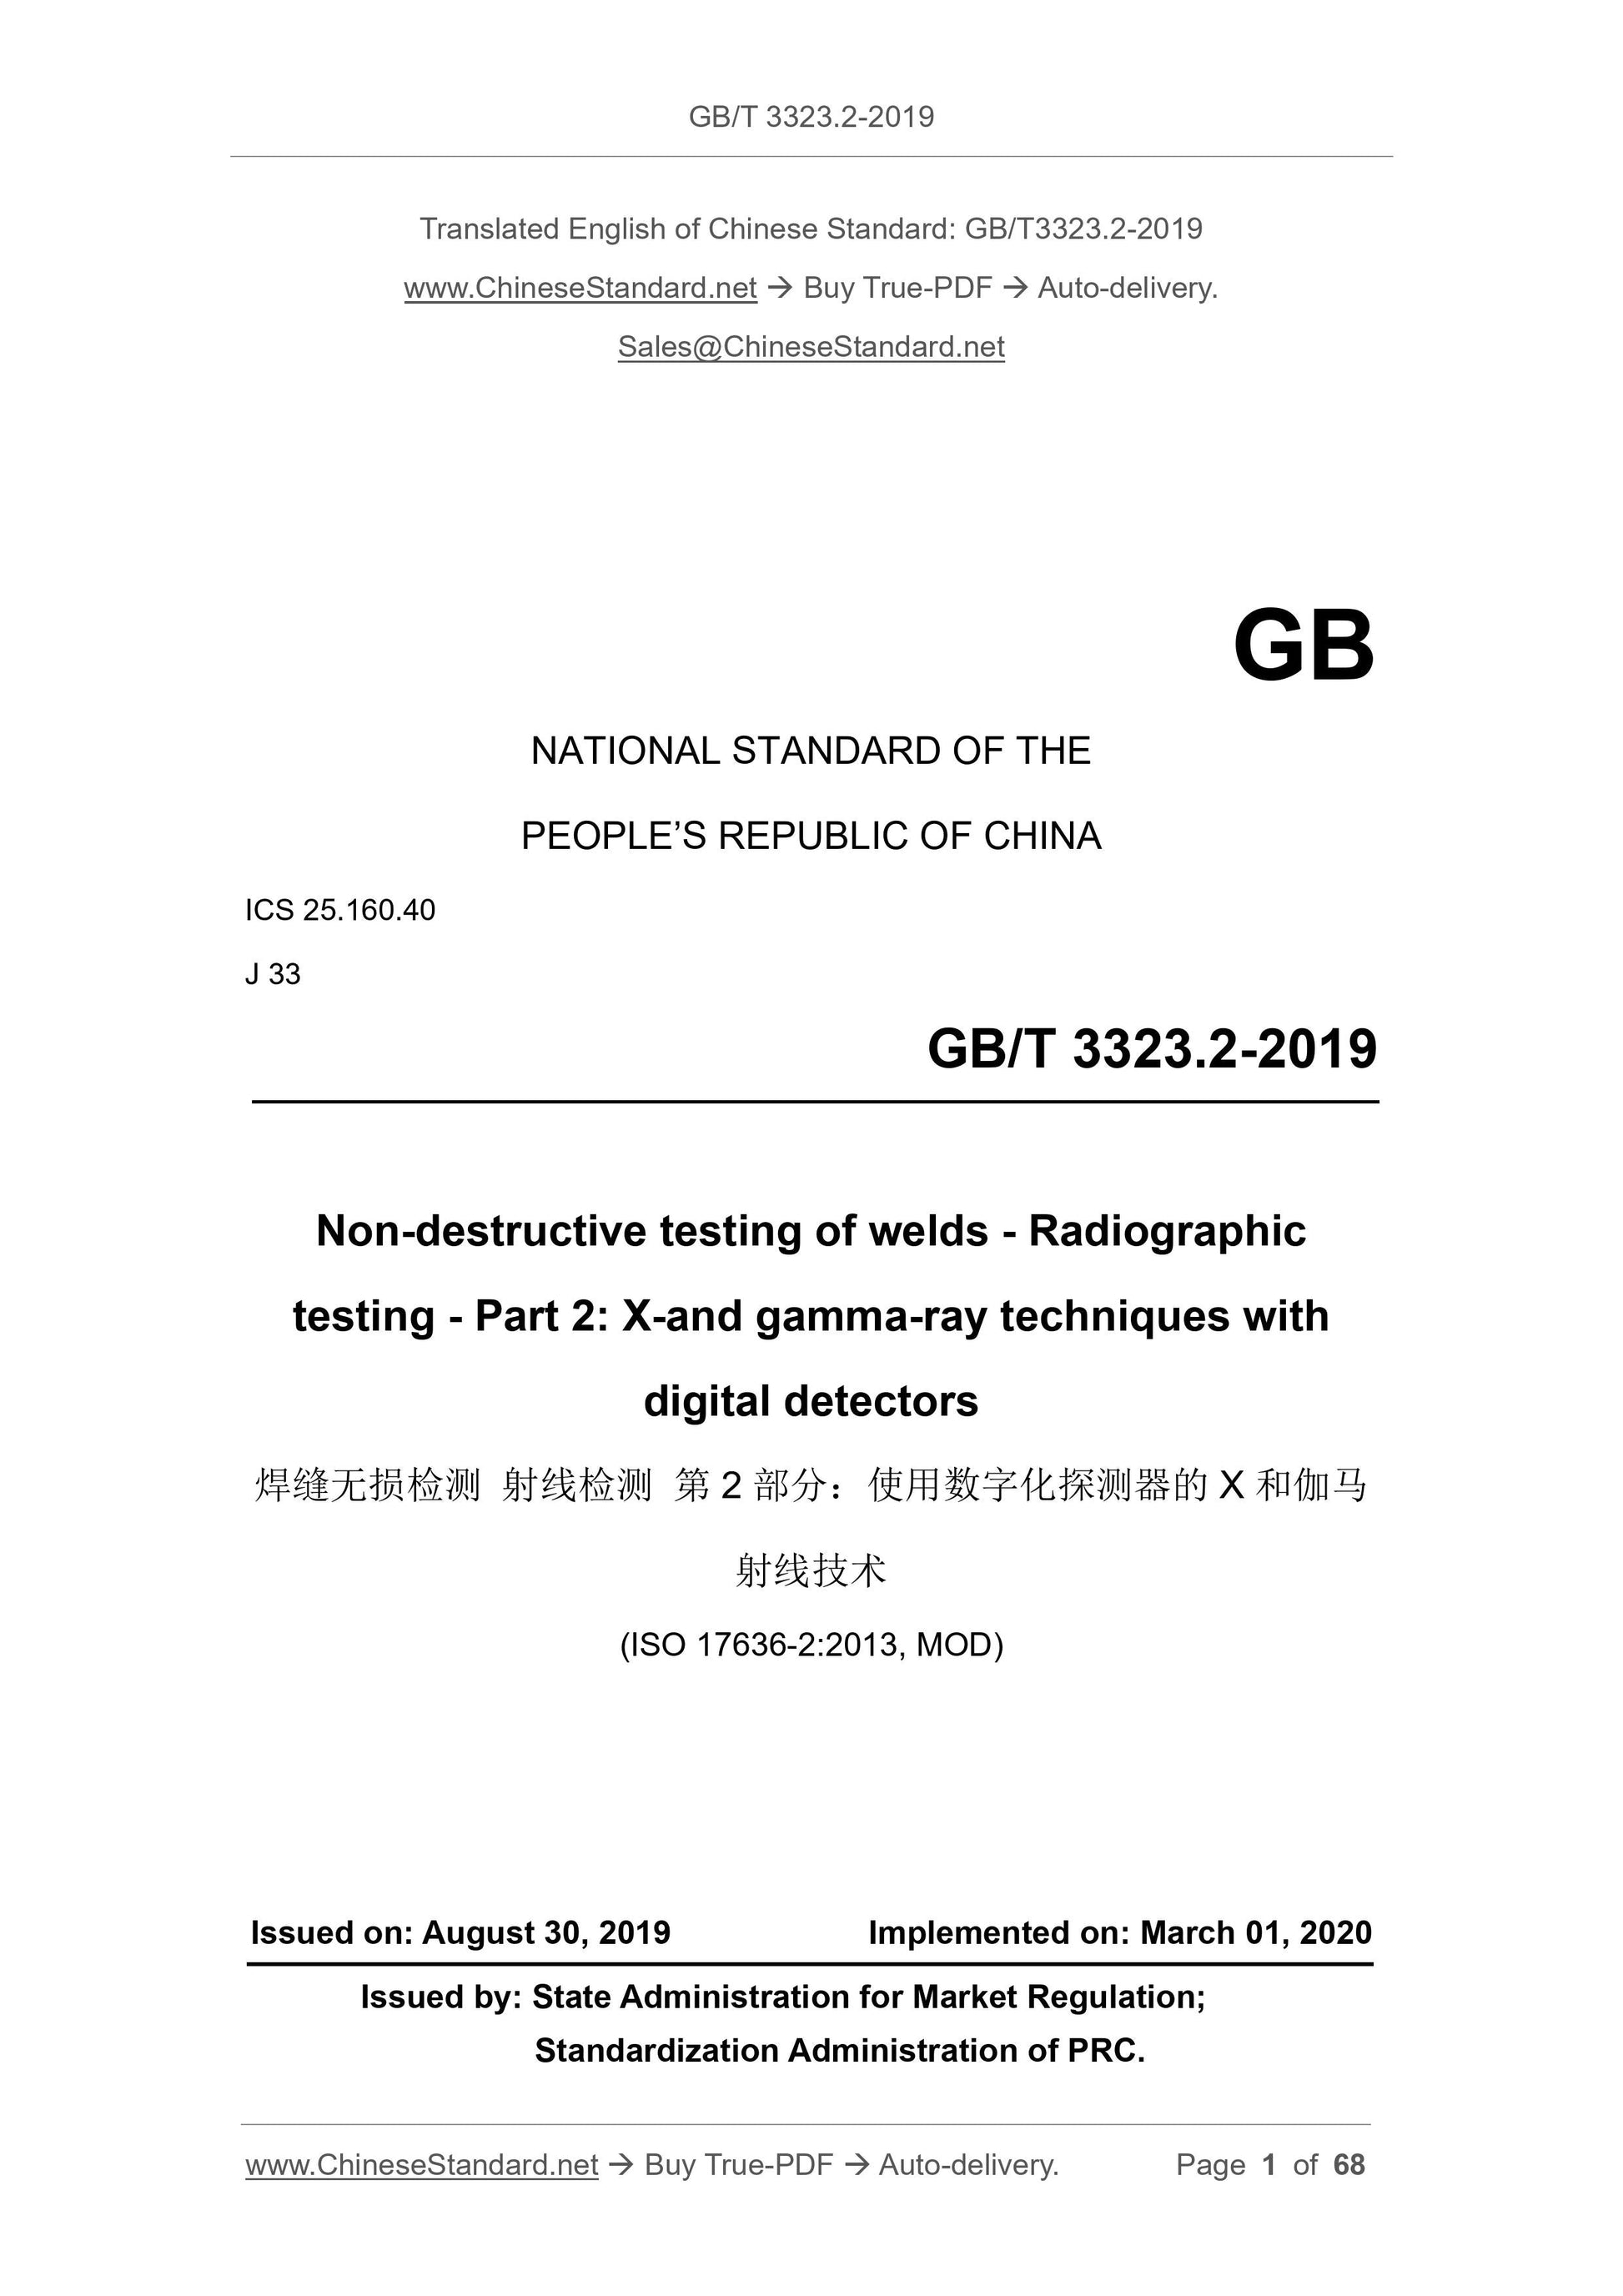 GB/T 3323.2-2019 Page 1